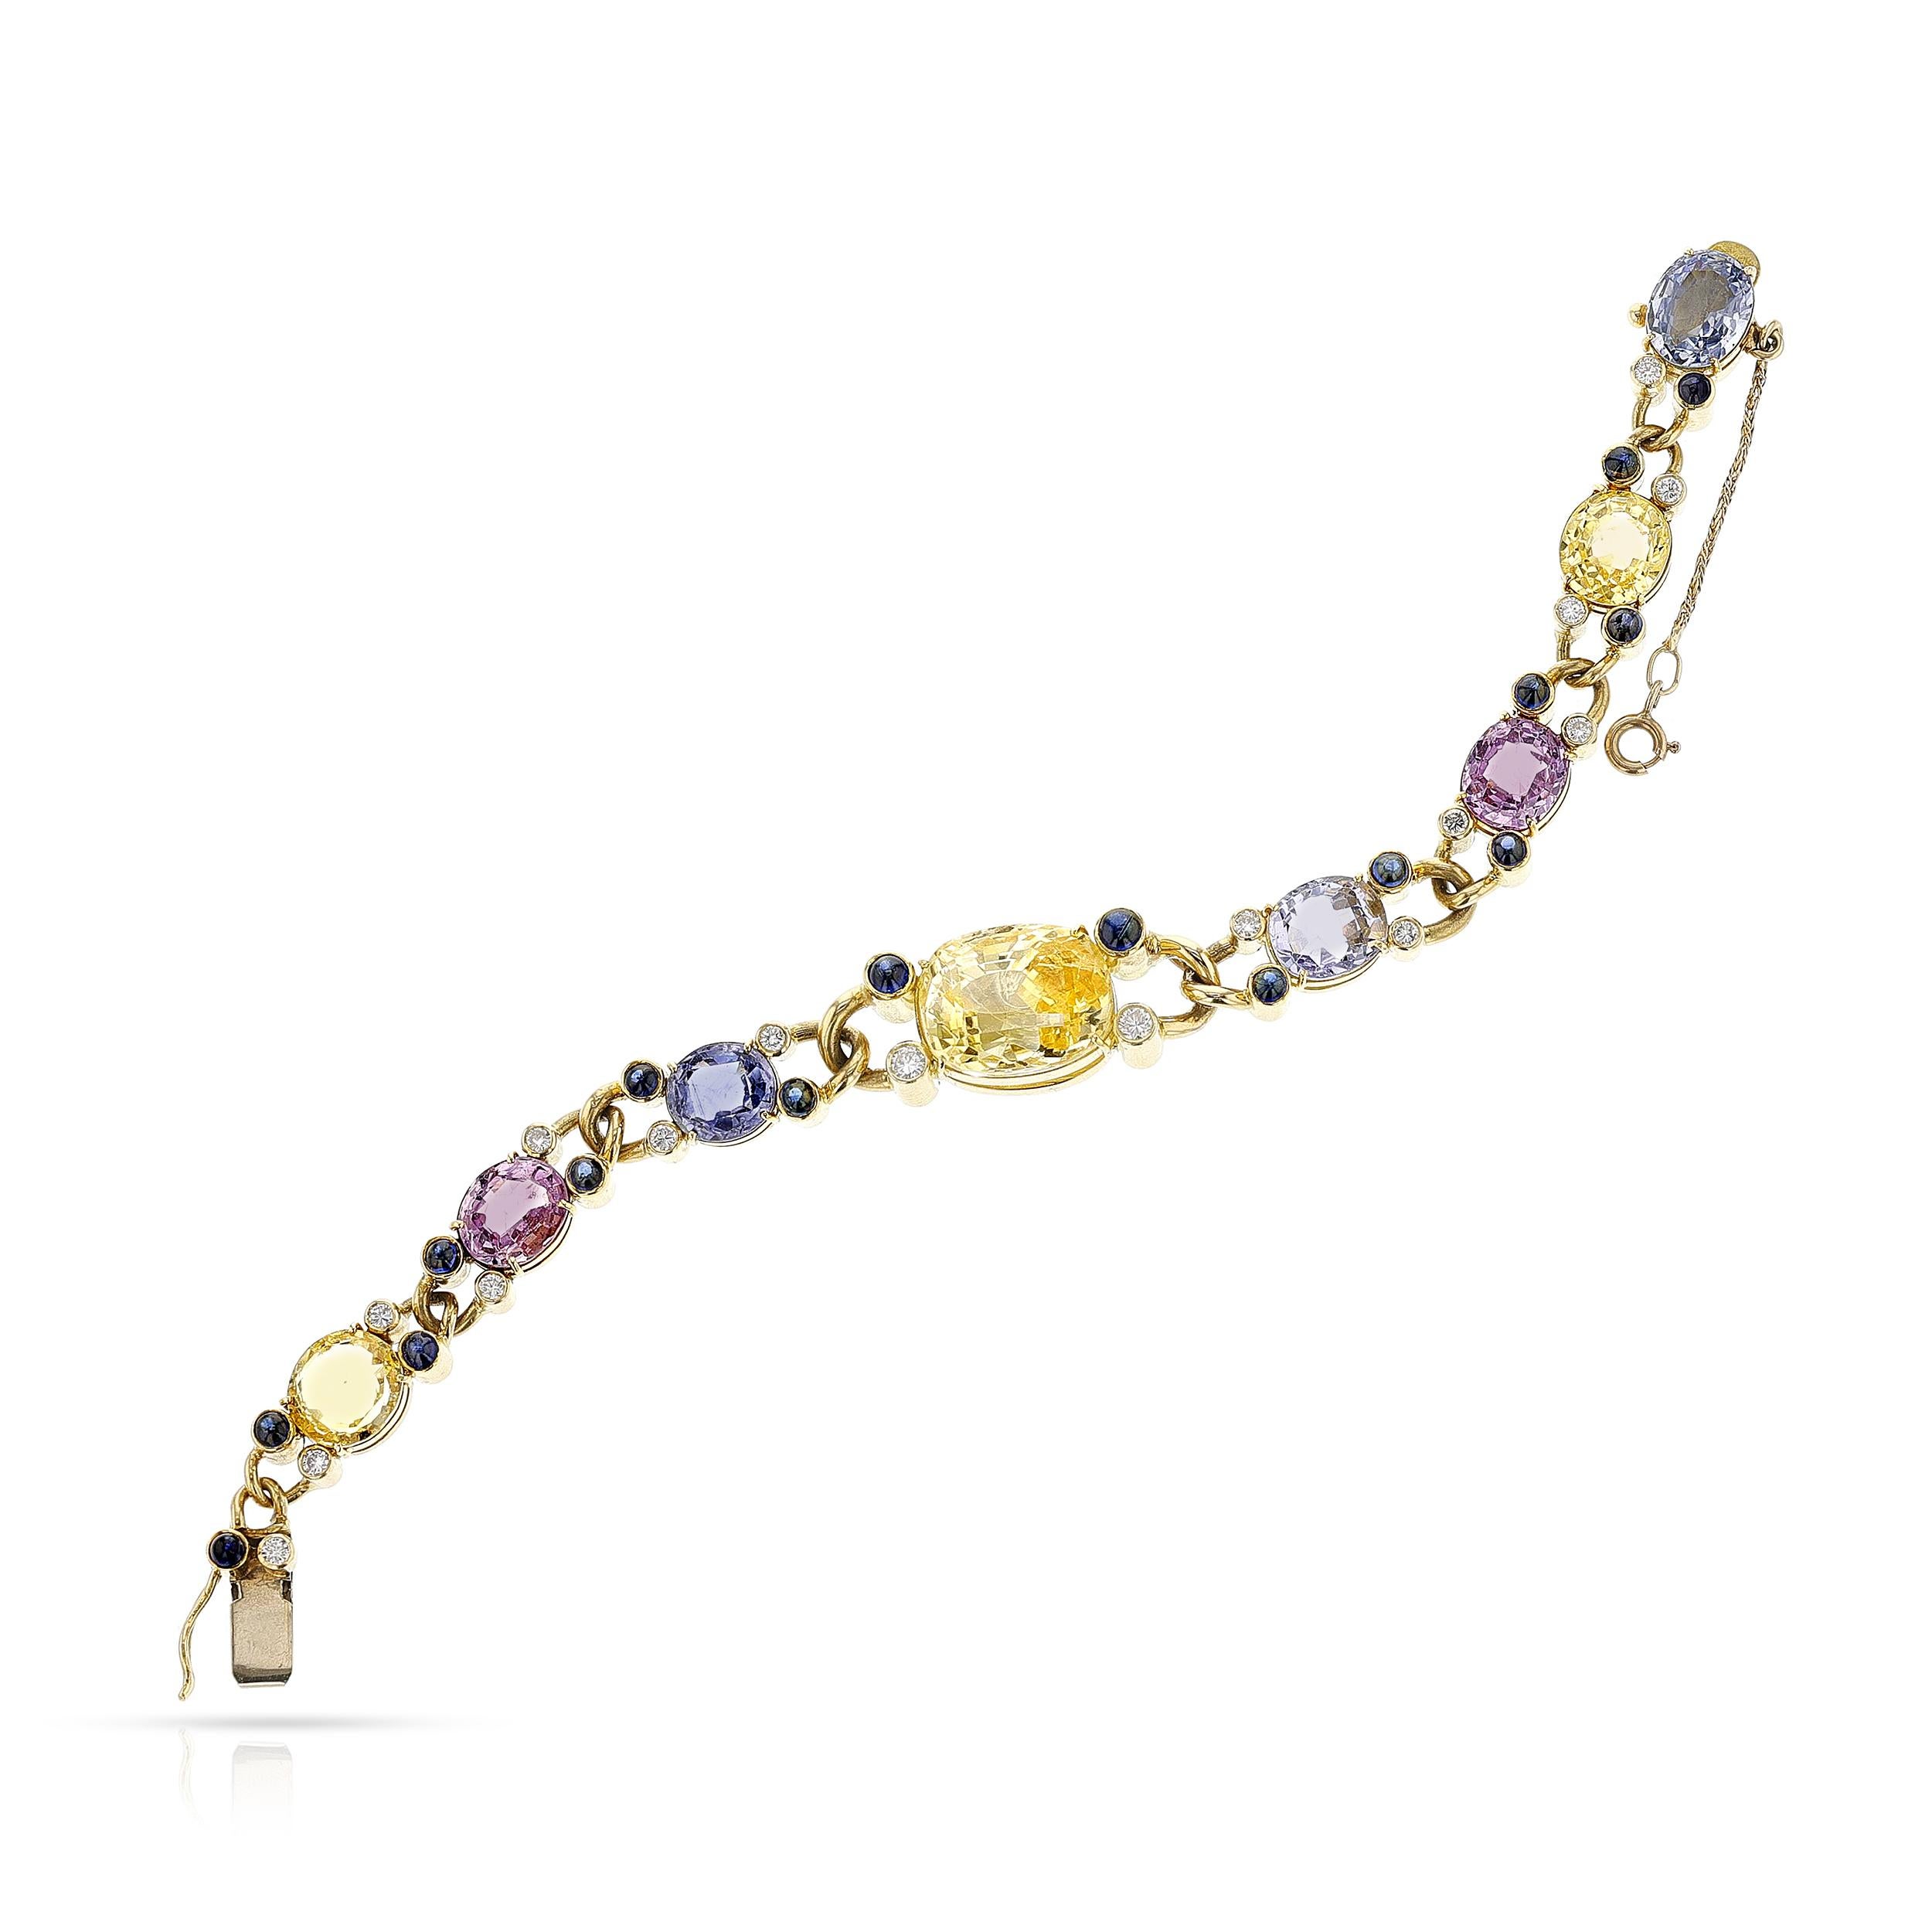 Multi-Color Sapphire Cut Stones and Cabochon with Diamond Bracelet by Deaken & Francis London made in 18k Yellow Gold. One oval
yellow sapphire is appx. 14.00 cts., 7 oval yellow, blue and pink sapphires appx. 21.00 cts., 15 round cabochon